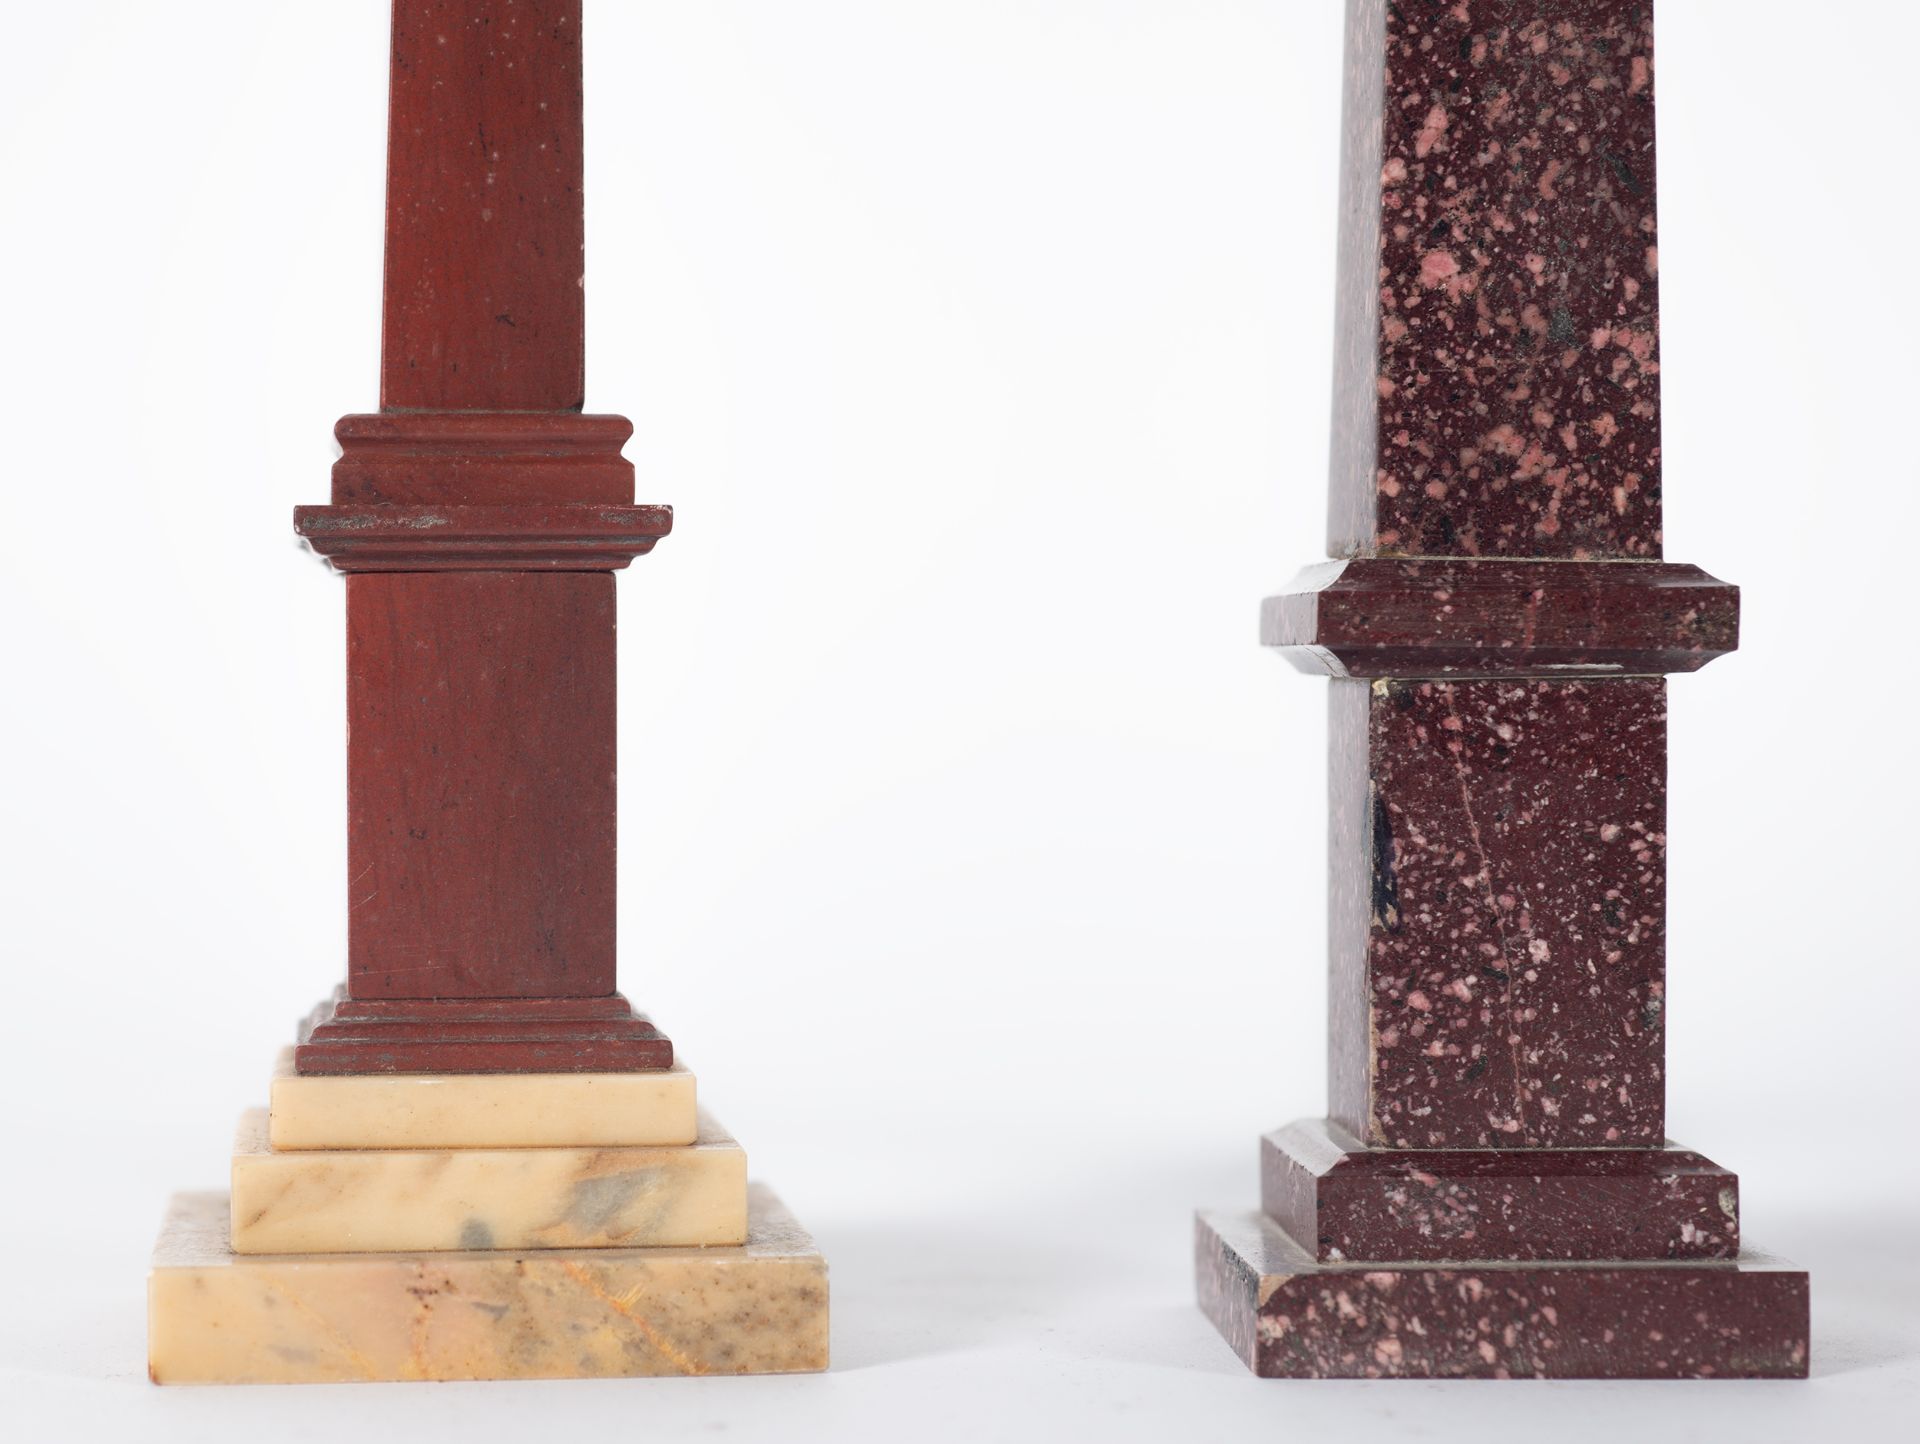 Lot of 3 columns in marble and porphyry, 19th - 20th century - Image 4 of 6